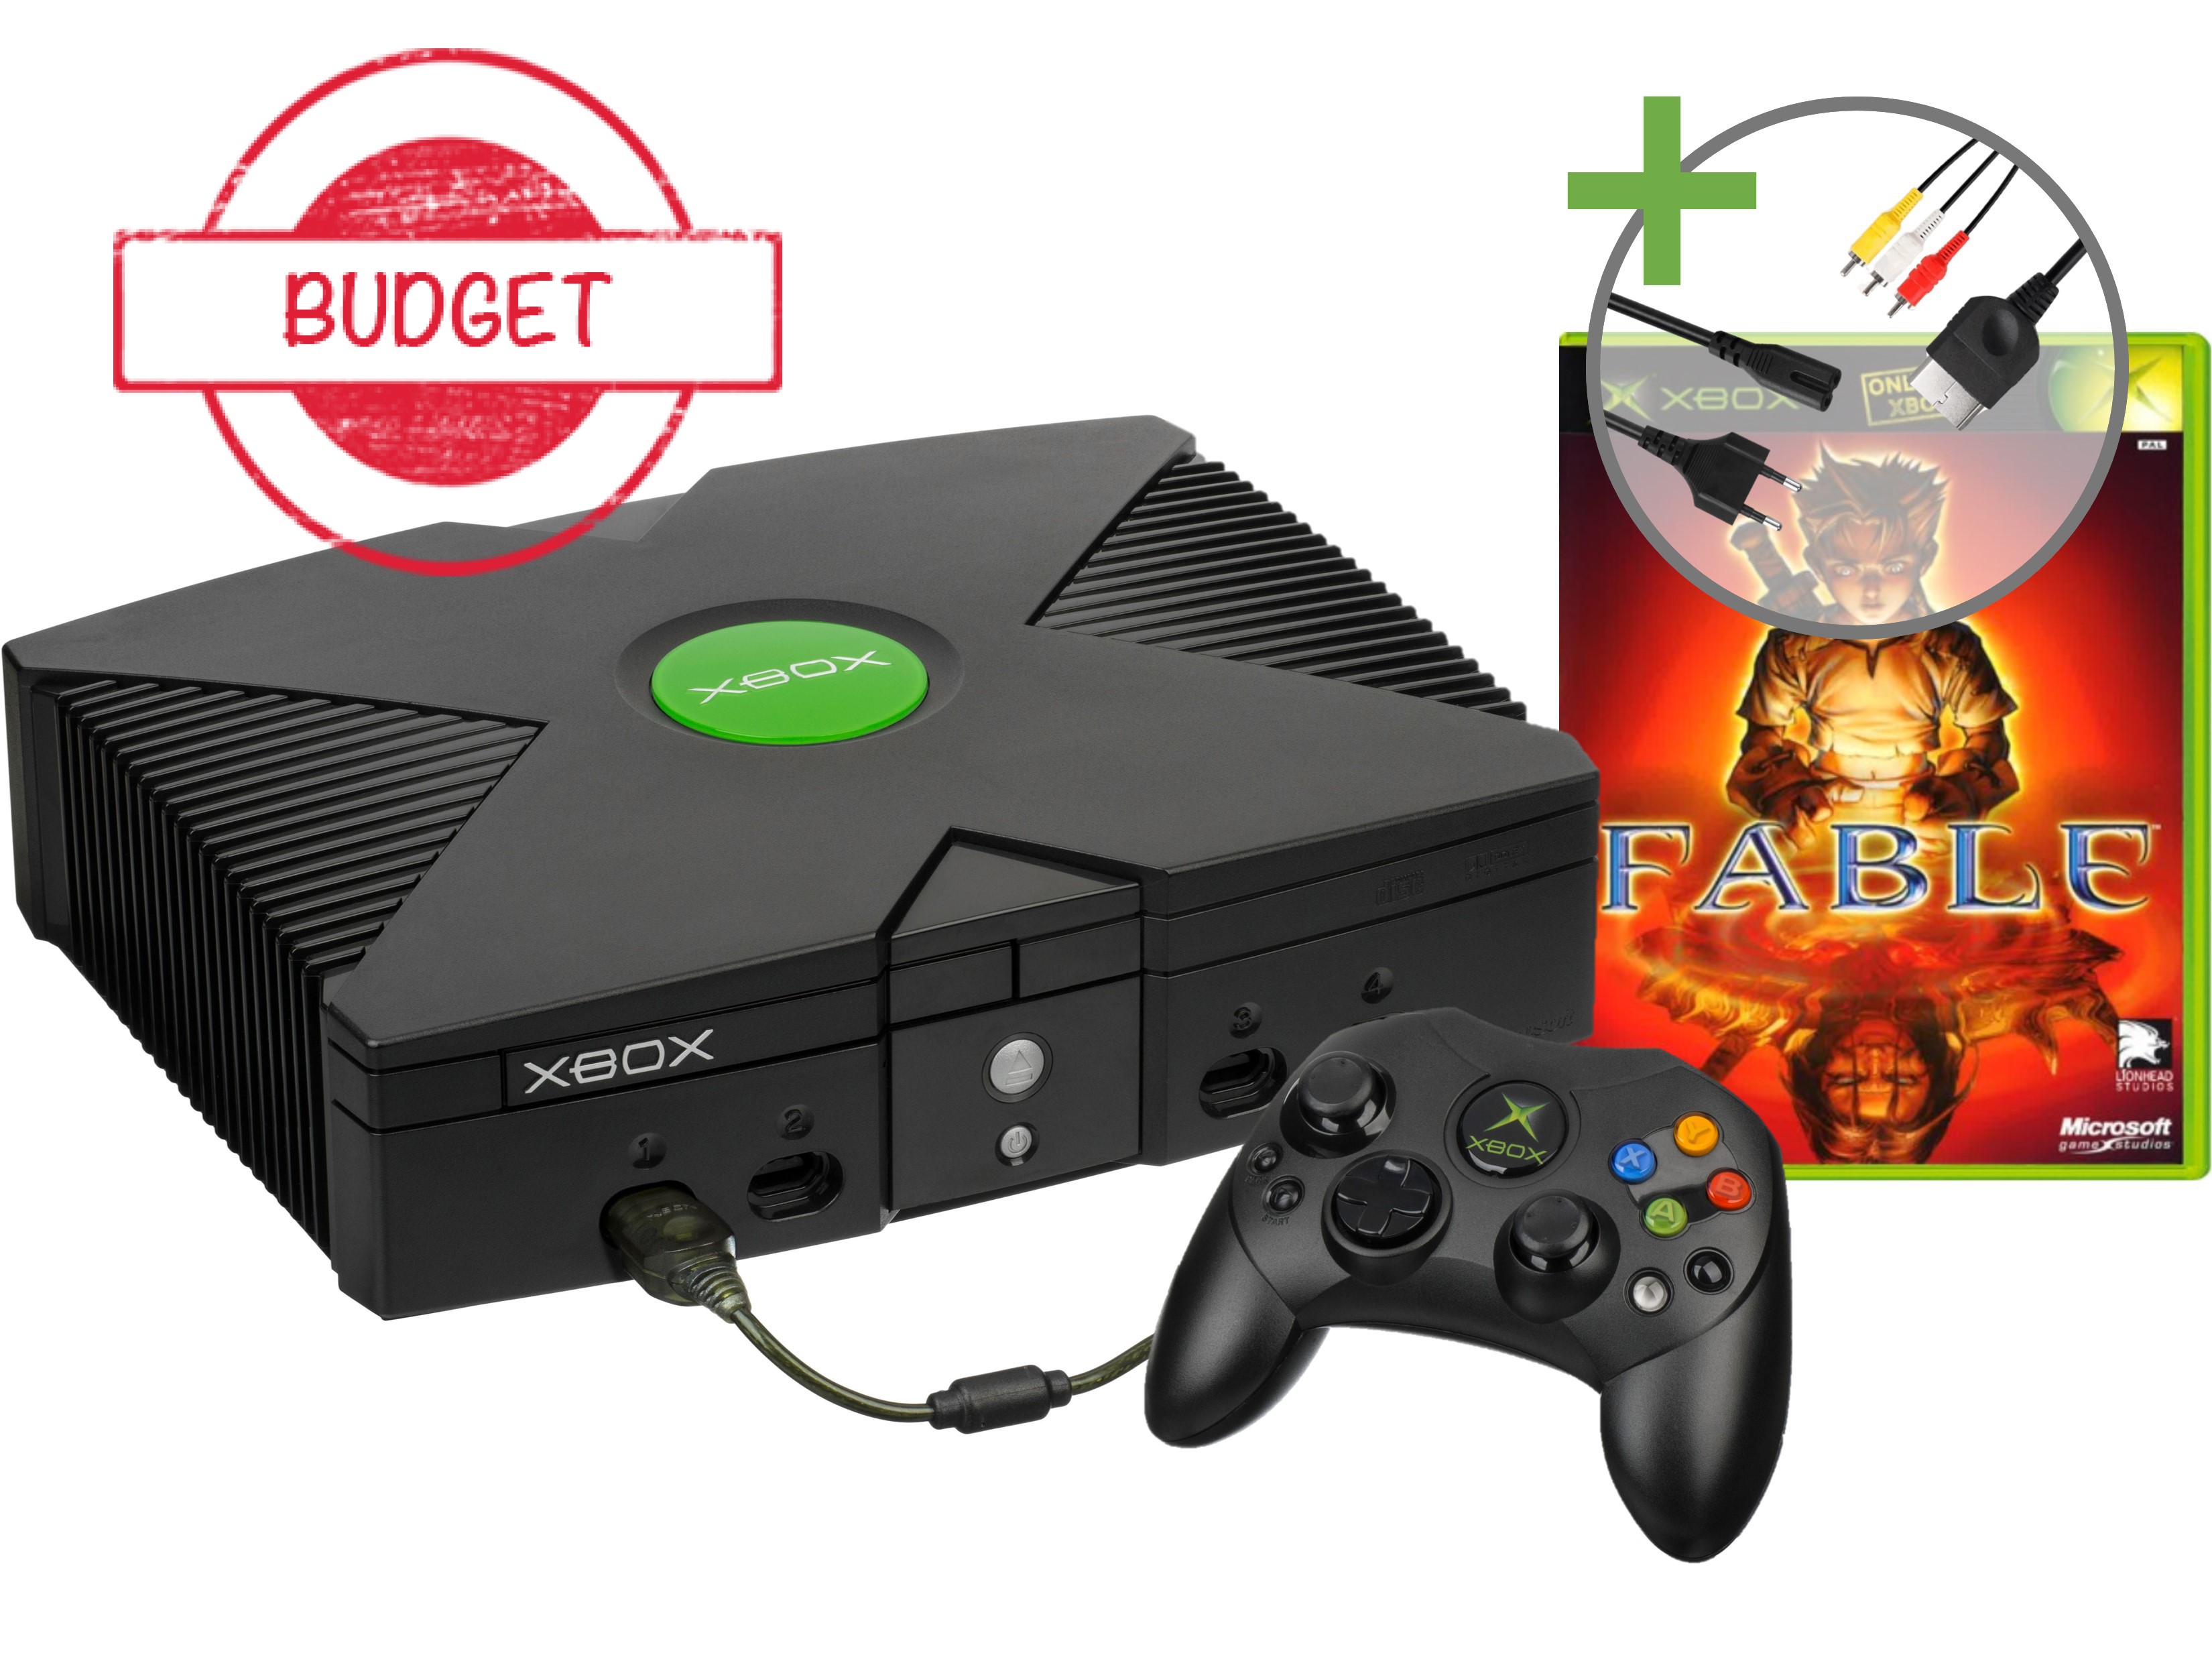 Microsoft Xbox Classic Starter Pack - Fable Edition - Budget - Xbox Original Hardware